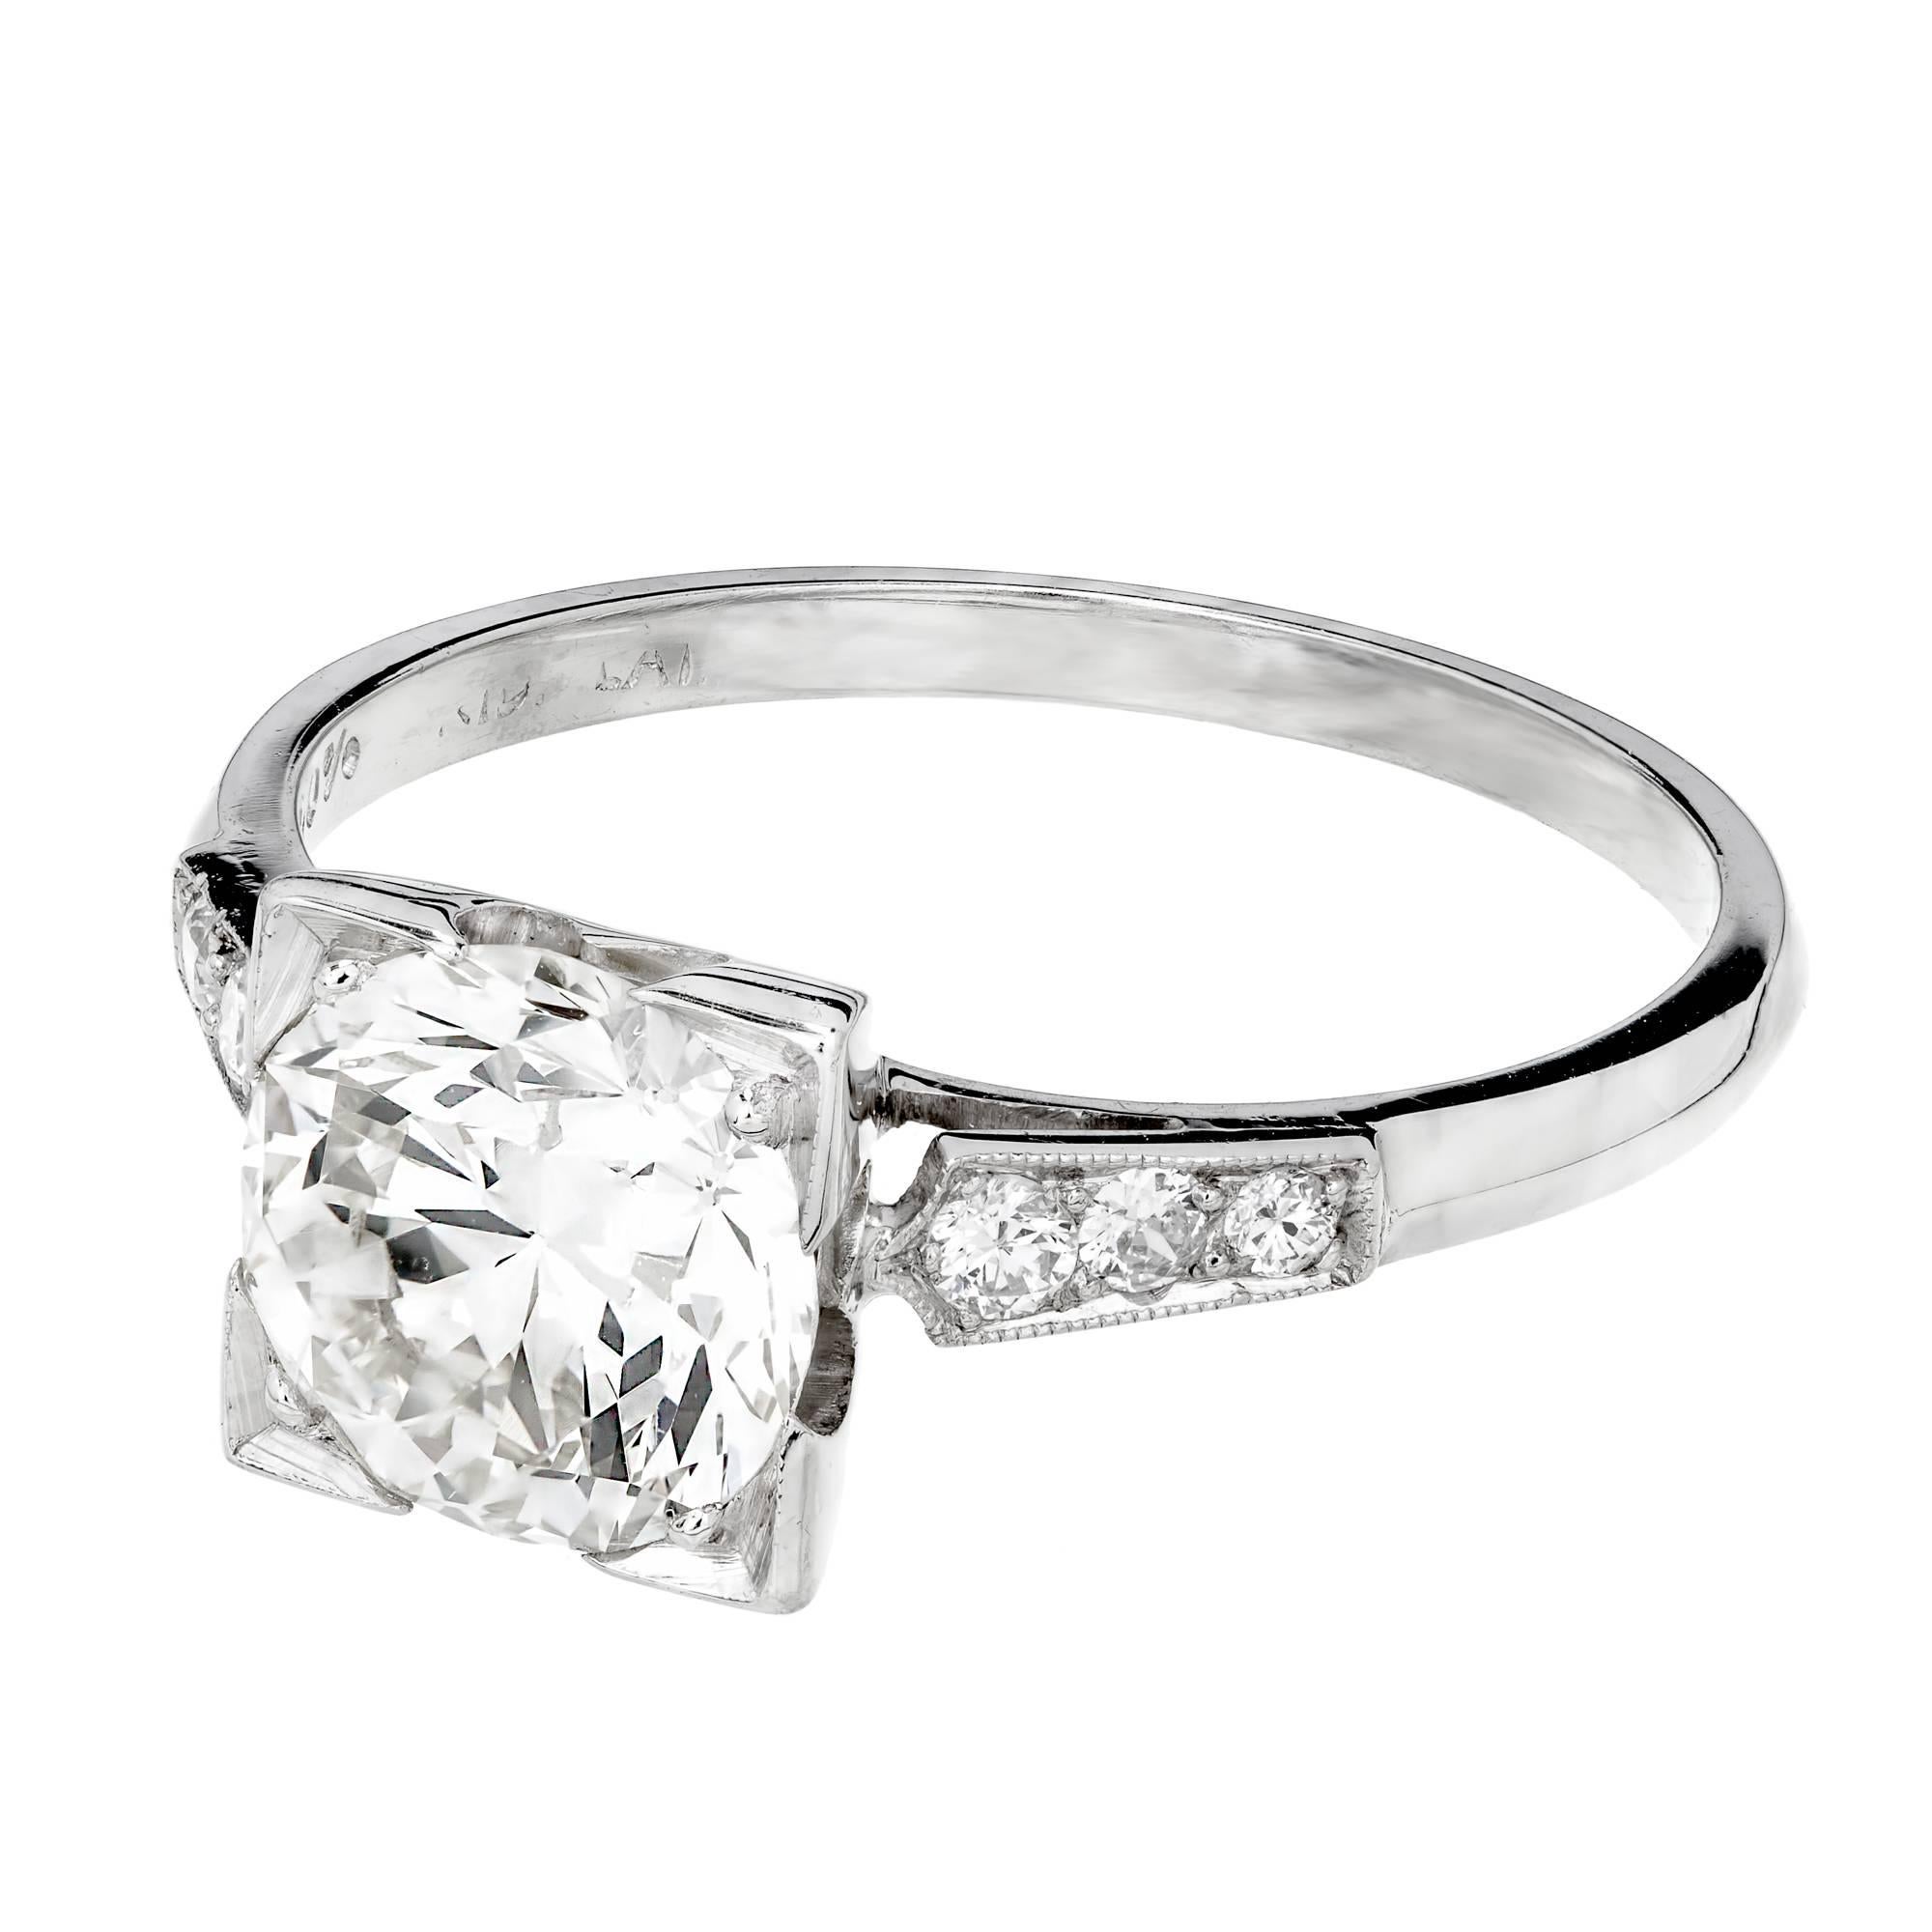 Art Deco old European cut diamond engagement ring with a bright sparkly center diamond in a square top. Accented with six side diamonds in a platinum setting. Original circa 1930-1940. 

1 old European cut diamond, approx. total weight 1.62cts, J to